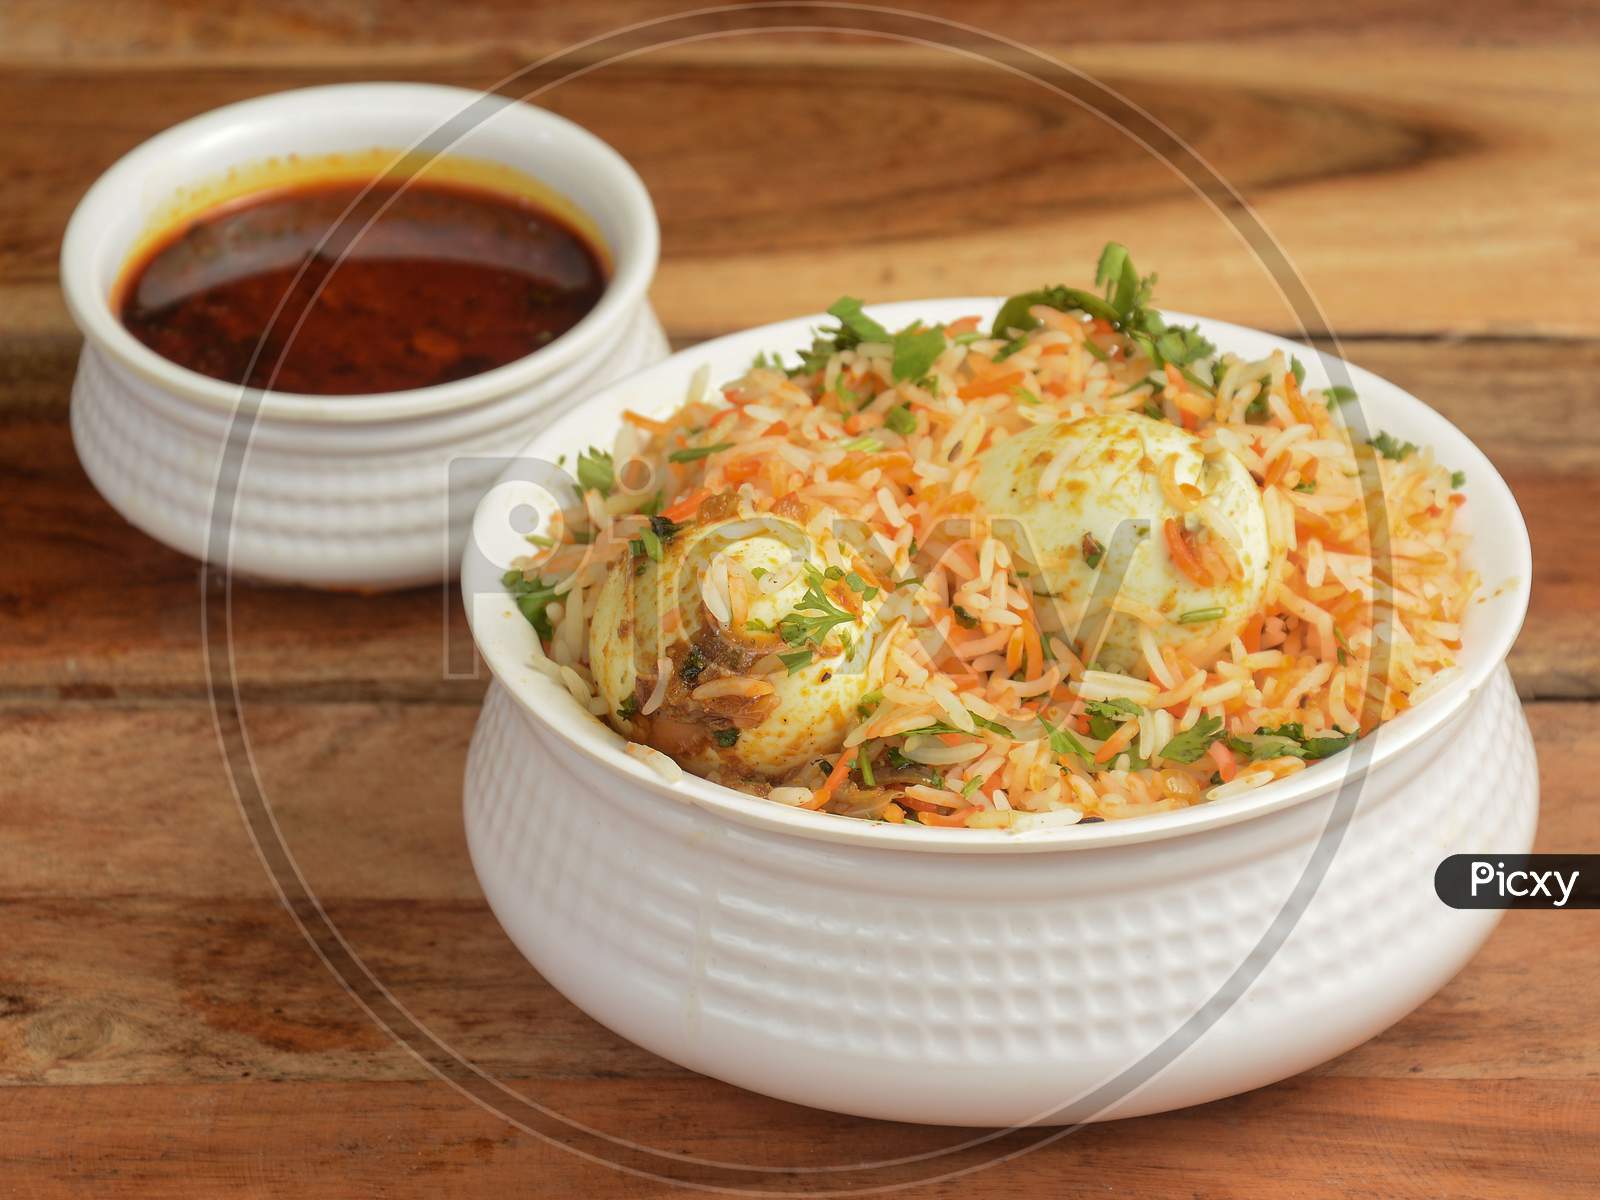 Egg Biryani - Basmati Rice Cooked With Masala And Spices And Served With Boiled Eggs And Brinjal Curry, Selective Focus